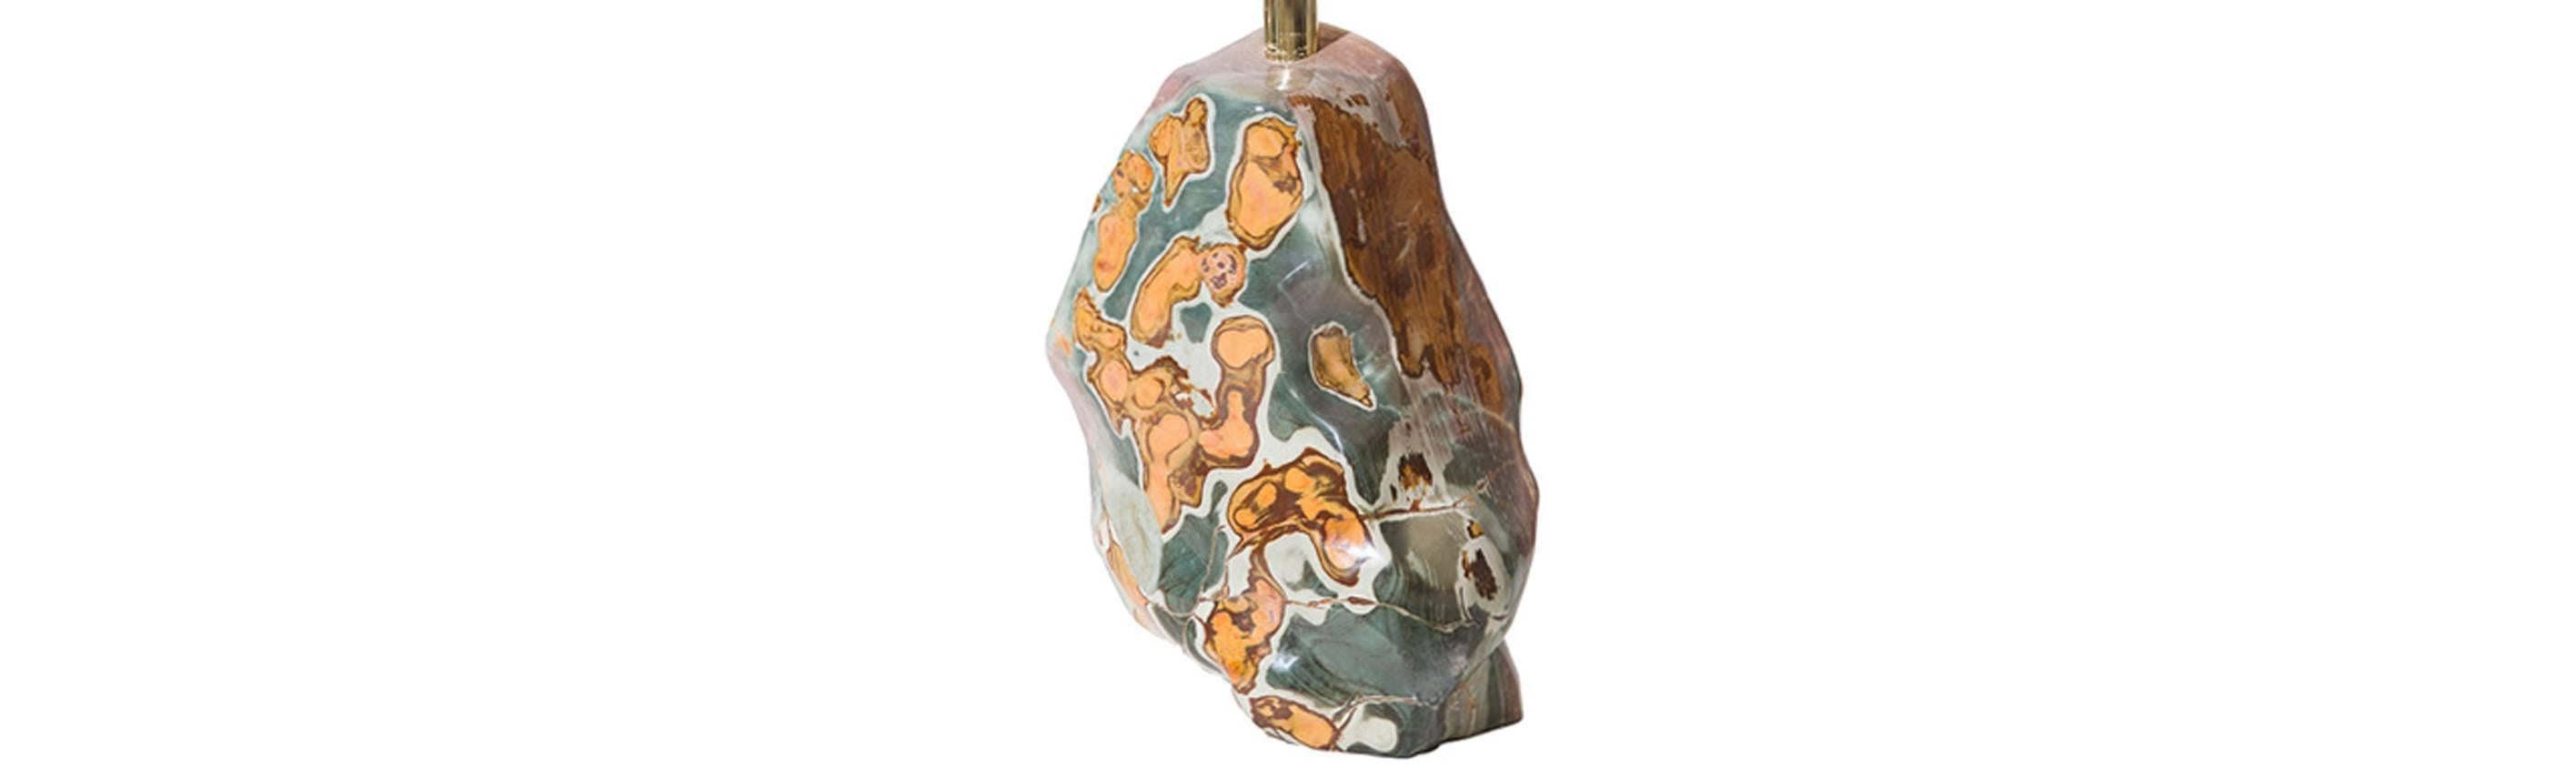 Stone Age gueridon with brass structure and base in semi-precious stone Jasper from Madagascar, designed and produced by Studio Superego.

Biography
Superego editions was born in 2006, performing a constant activity of research in decorative arts by